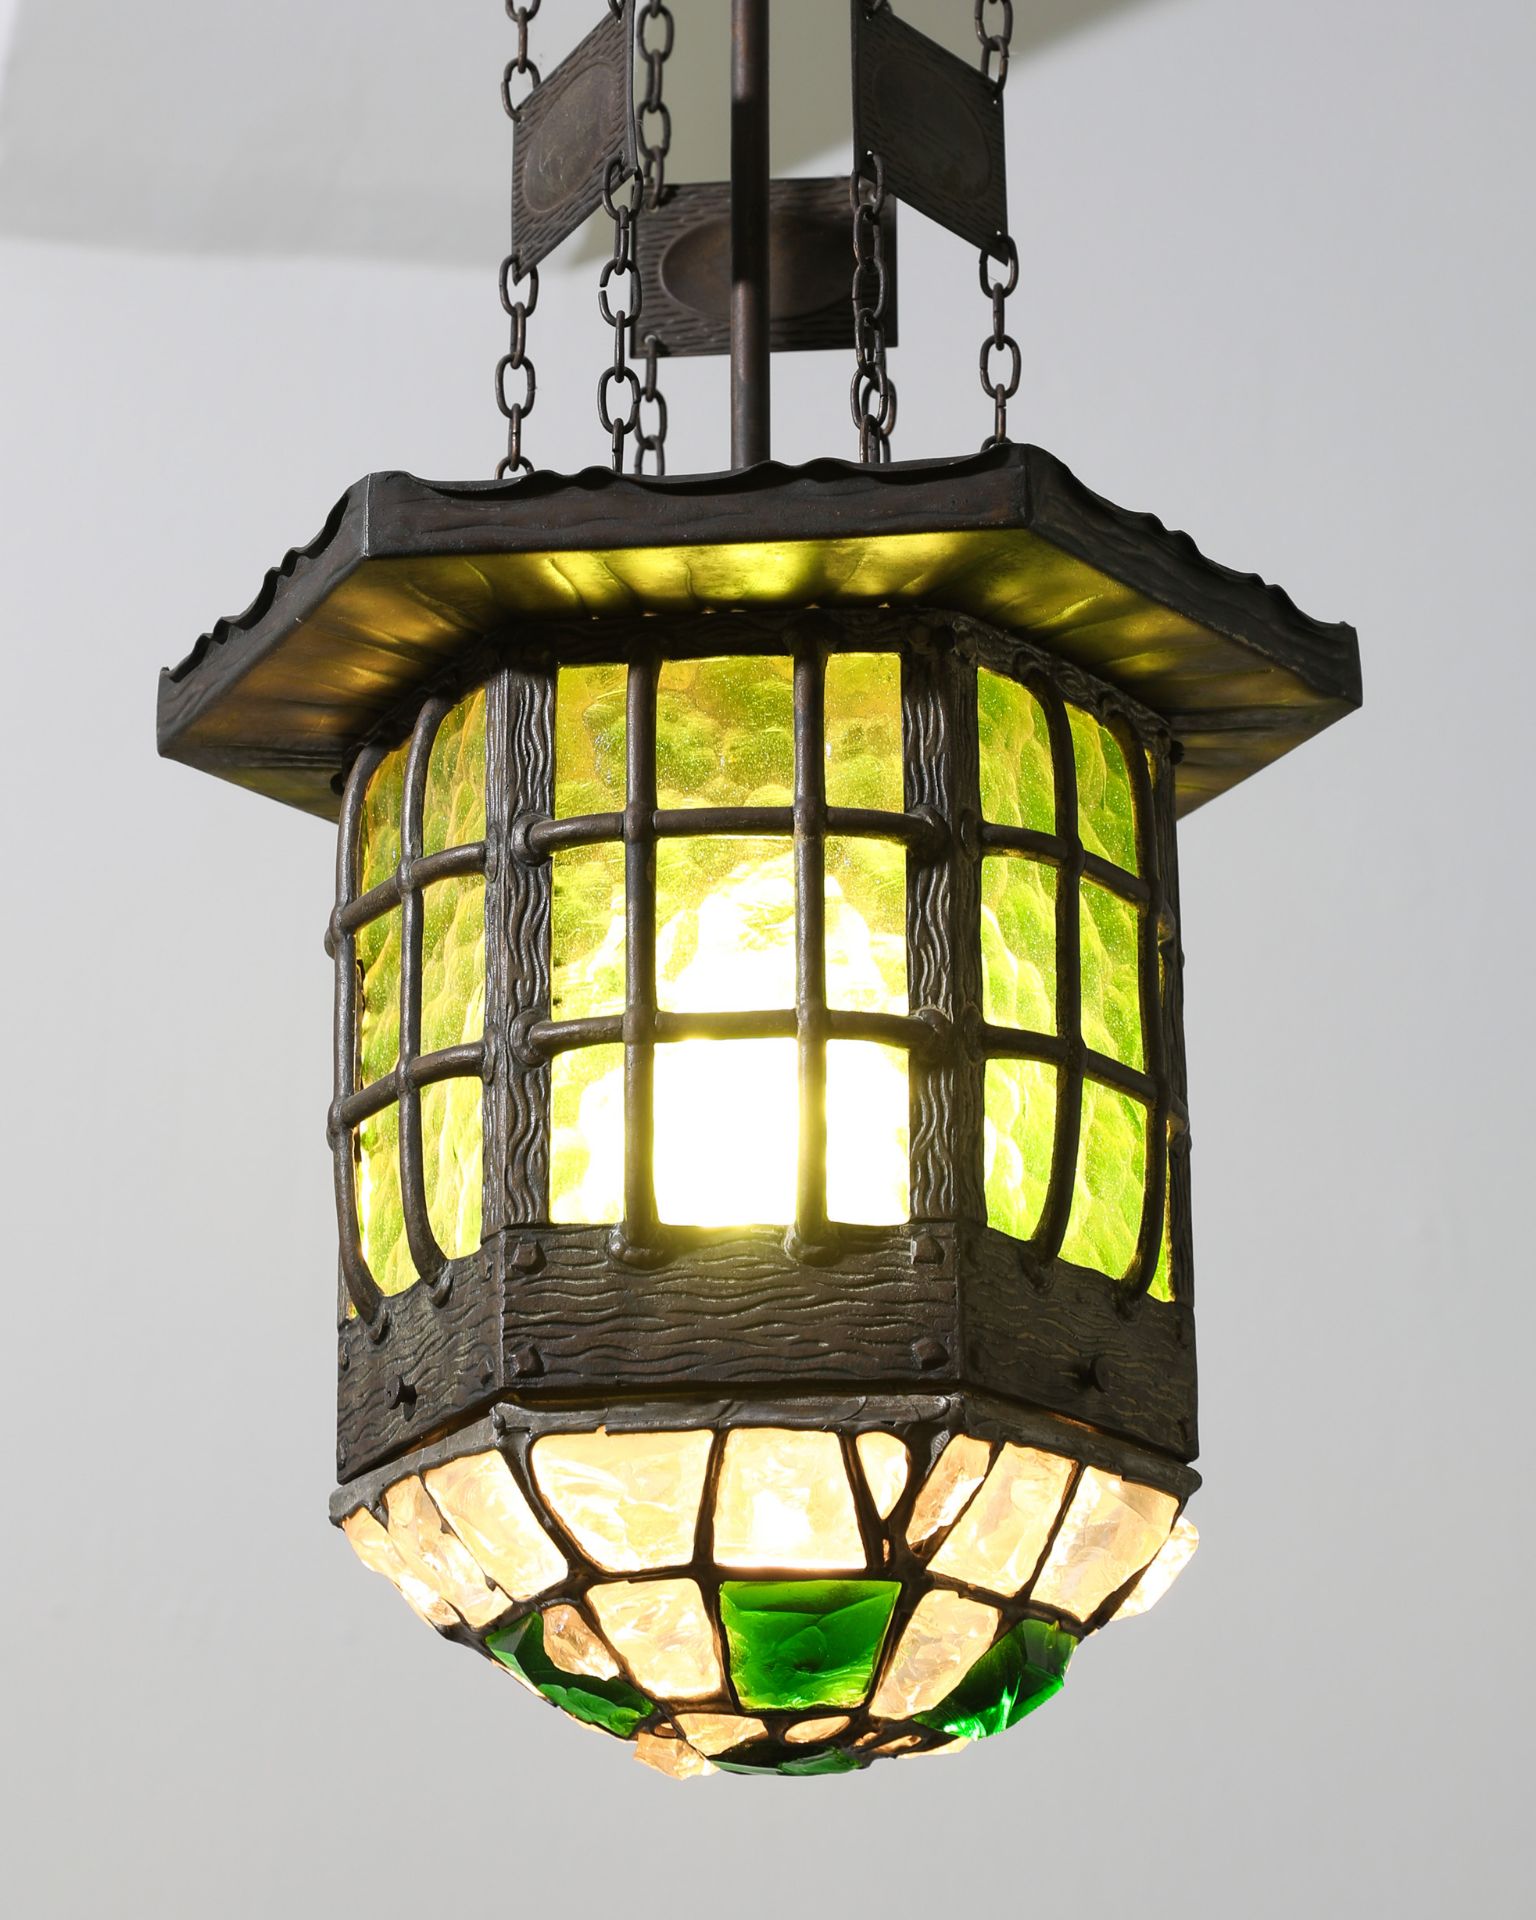 Art Nouveau hanging Lamp, metal, glass, probably Berlin around 1900 - Image 3 of 4